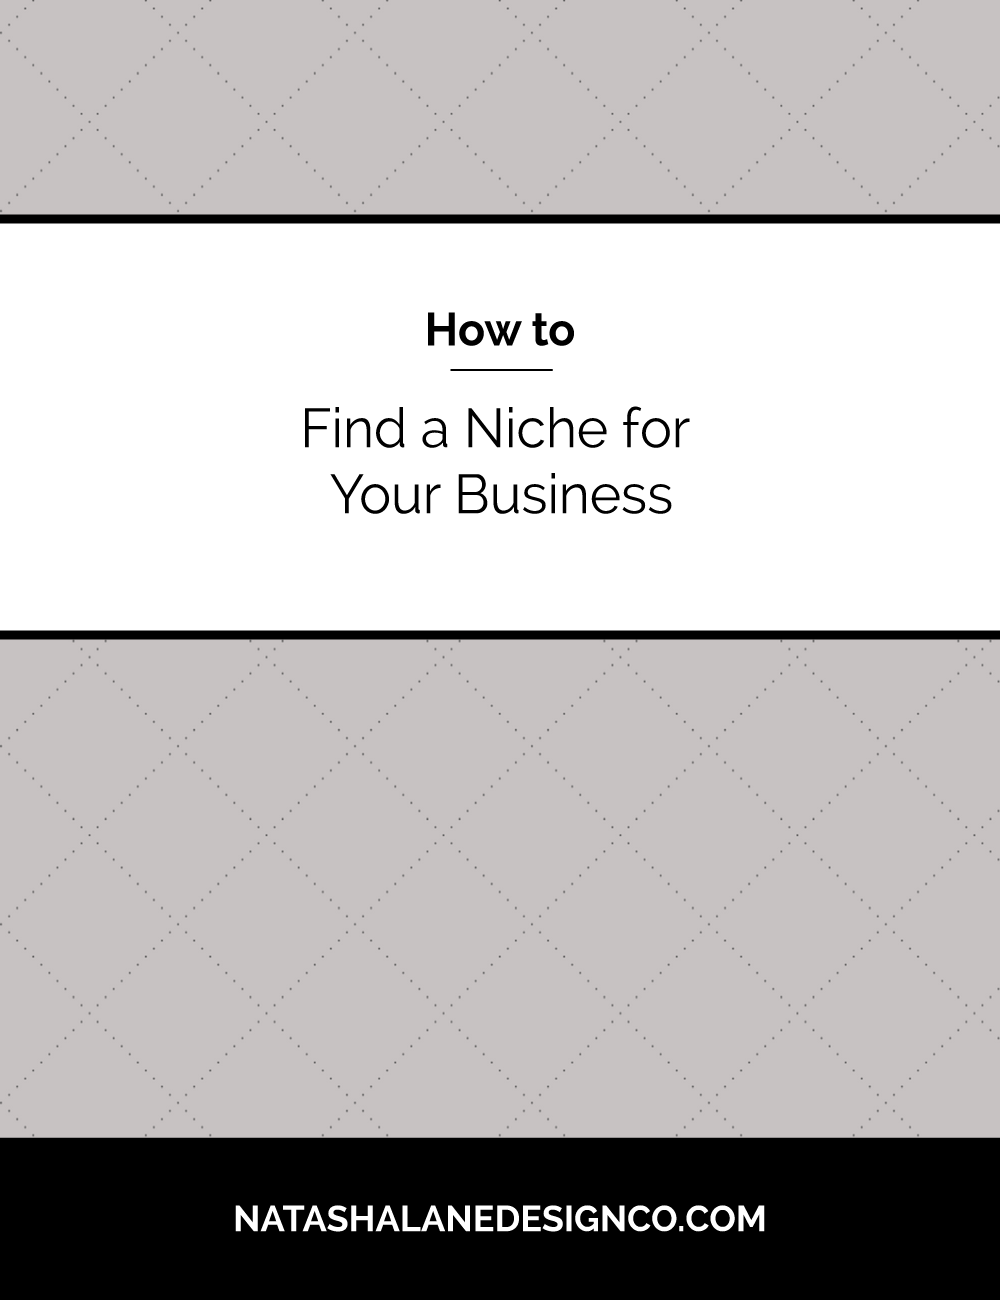 How to Find a Niche for Your BusinessHow to Find a Niche for Your Business